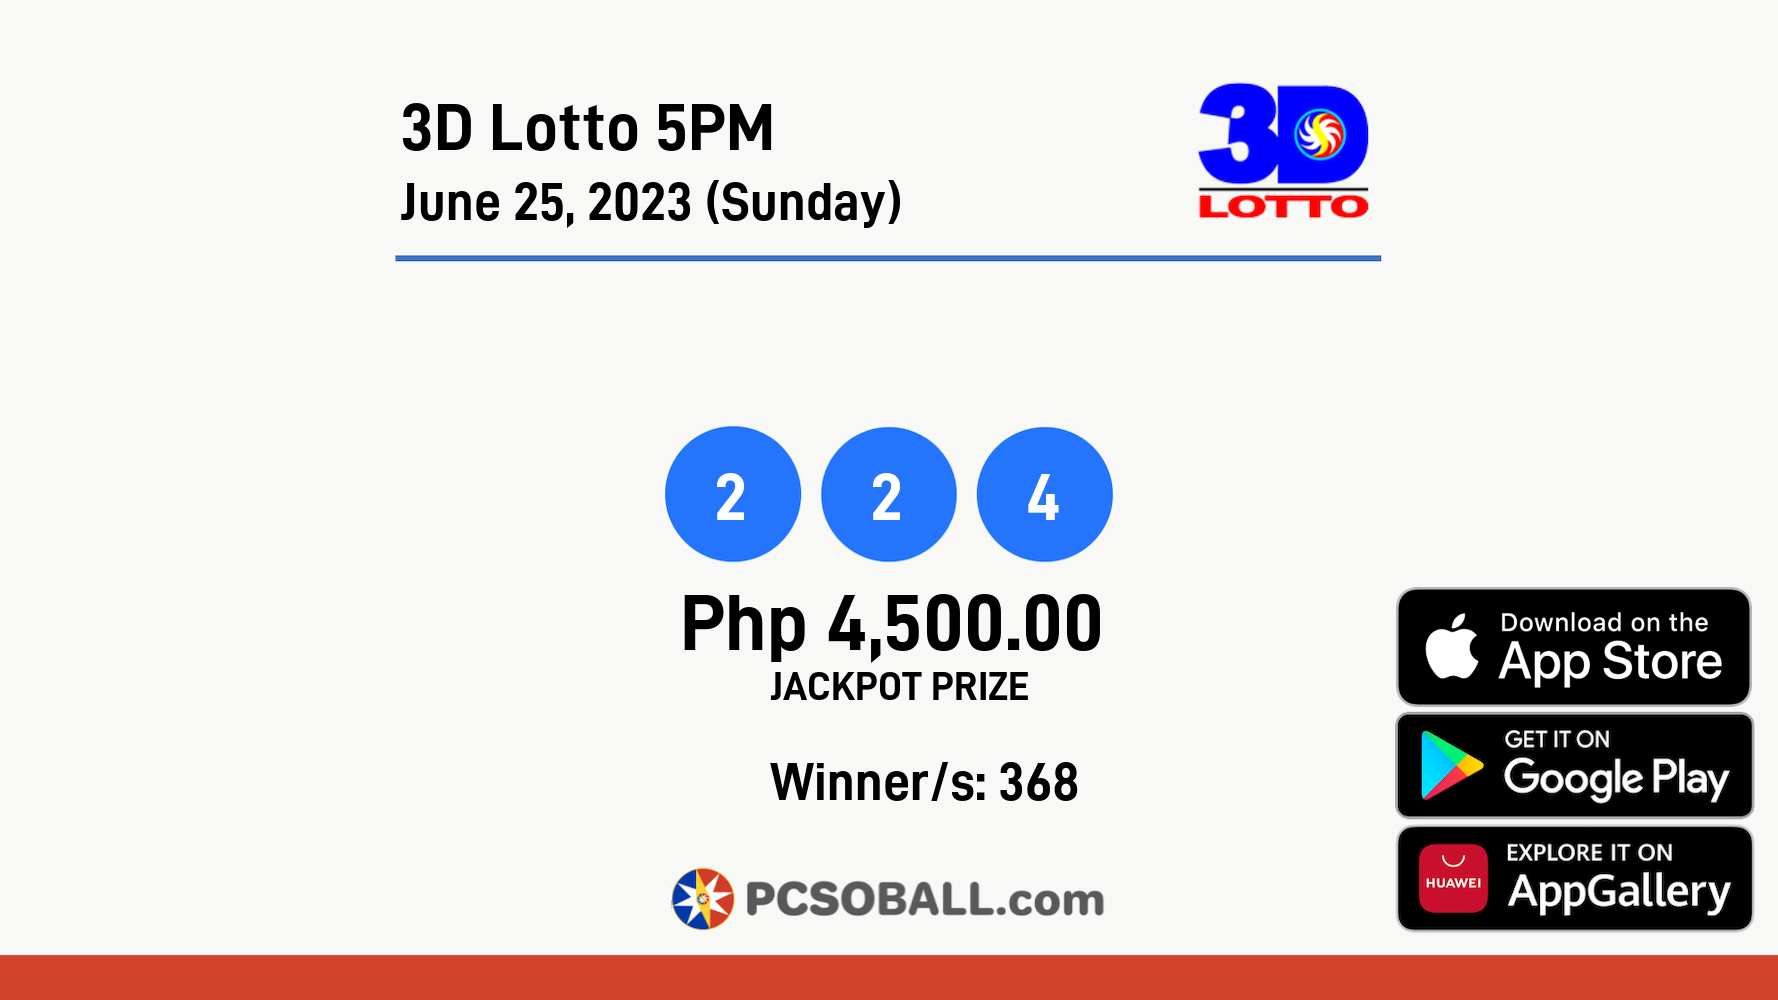 3D Lotto 5PM June 25, 2023 (Sunday) Result